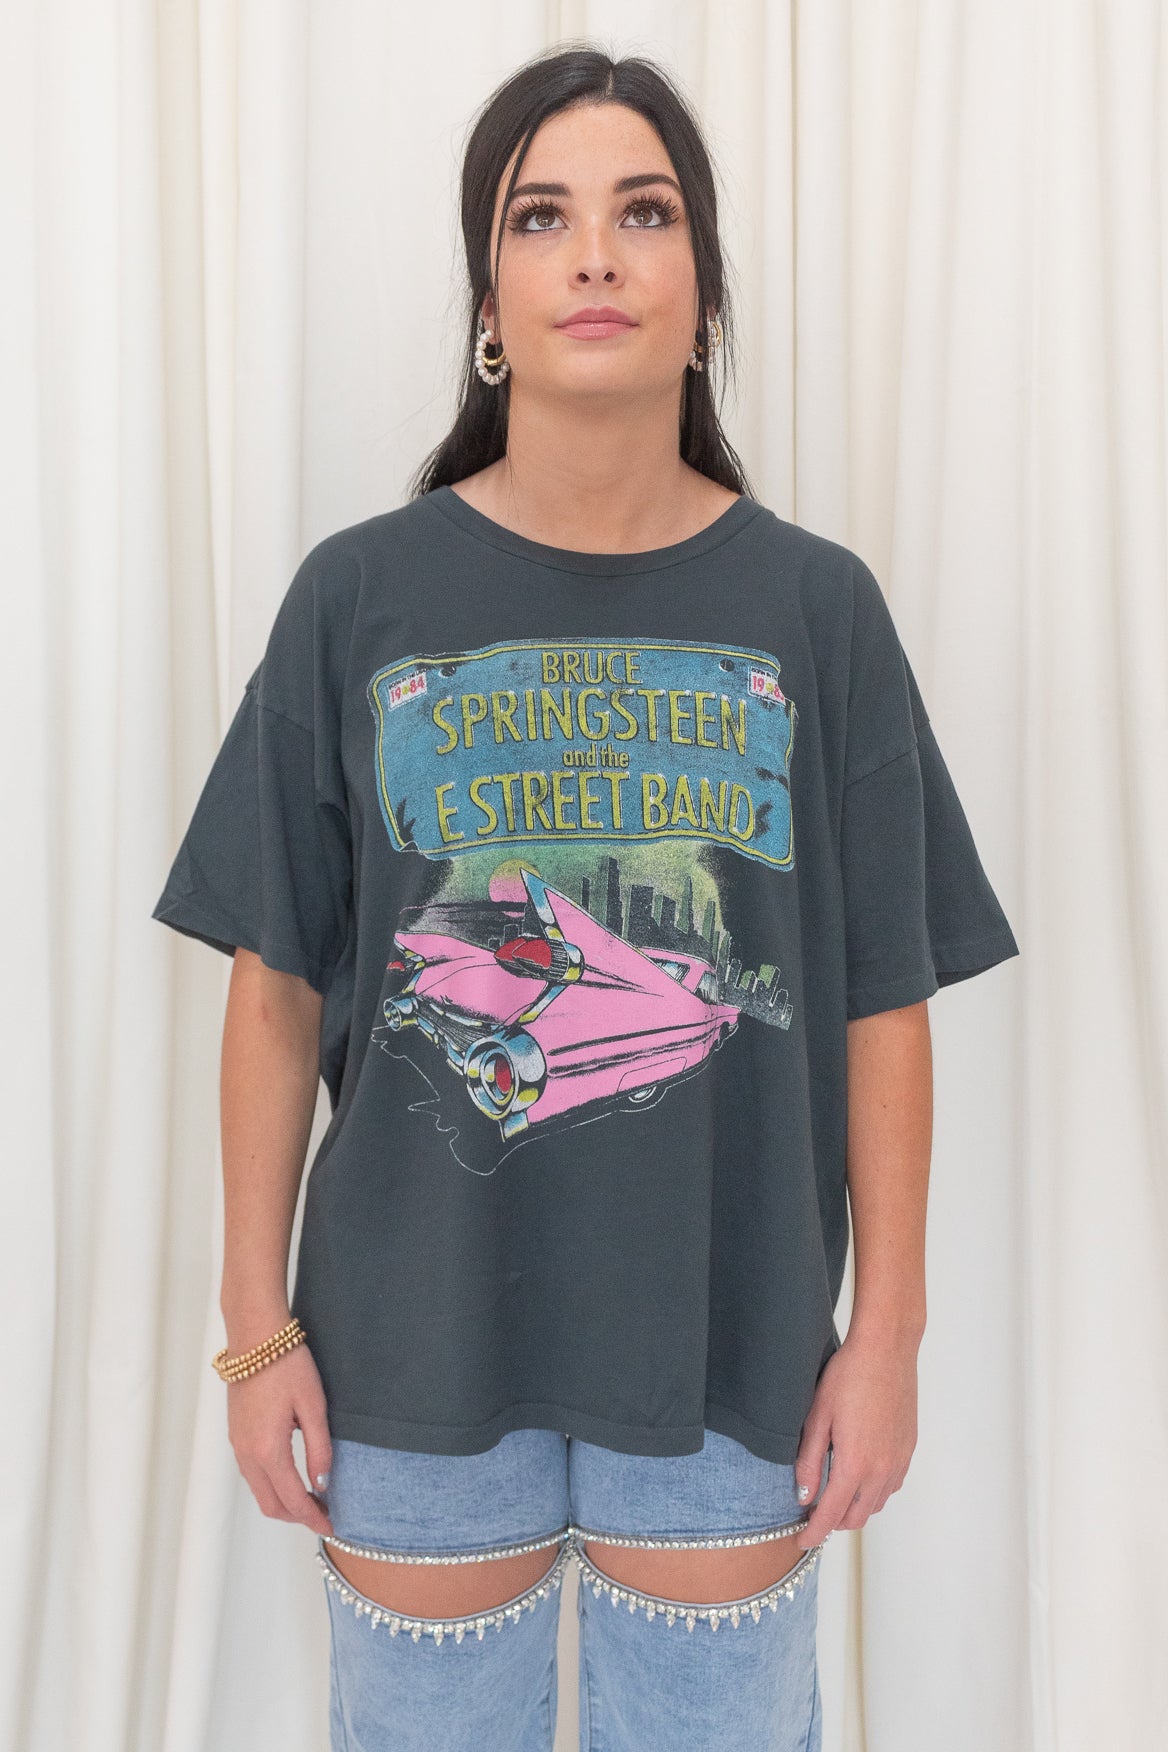 Black graphic tee featuring  Bruce Springsteen's Born in The USA Merch Tee. Crafted with the legendary pink cadillac and 'Born in the U.S.A.' tour logo,